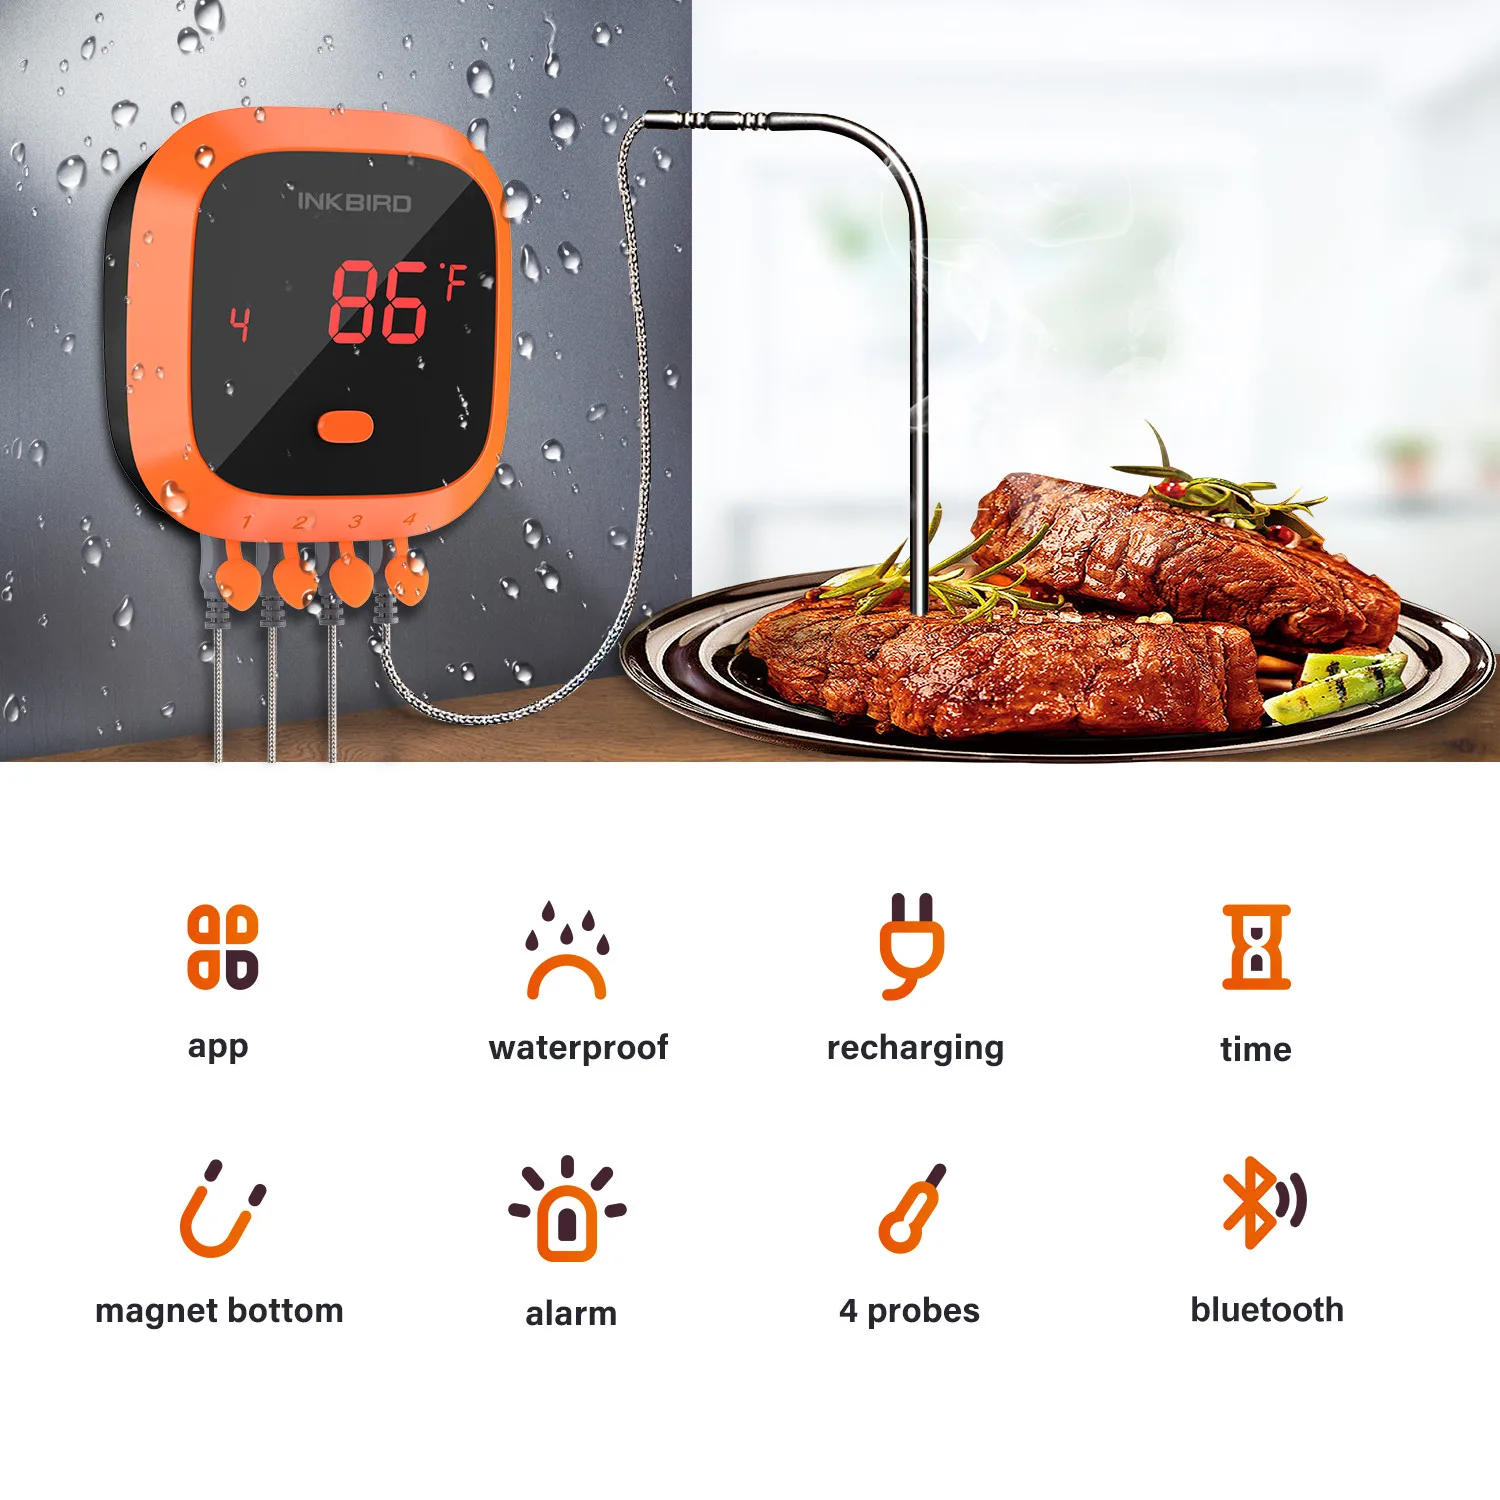 INKBIRD IHT-2PB Digital Bluetooth Meat Thermometer With 1 External Probe  Instant Readout IPX5 Waterproof Rechargeable Free APP